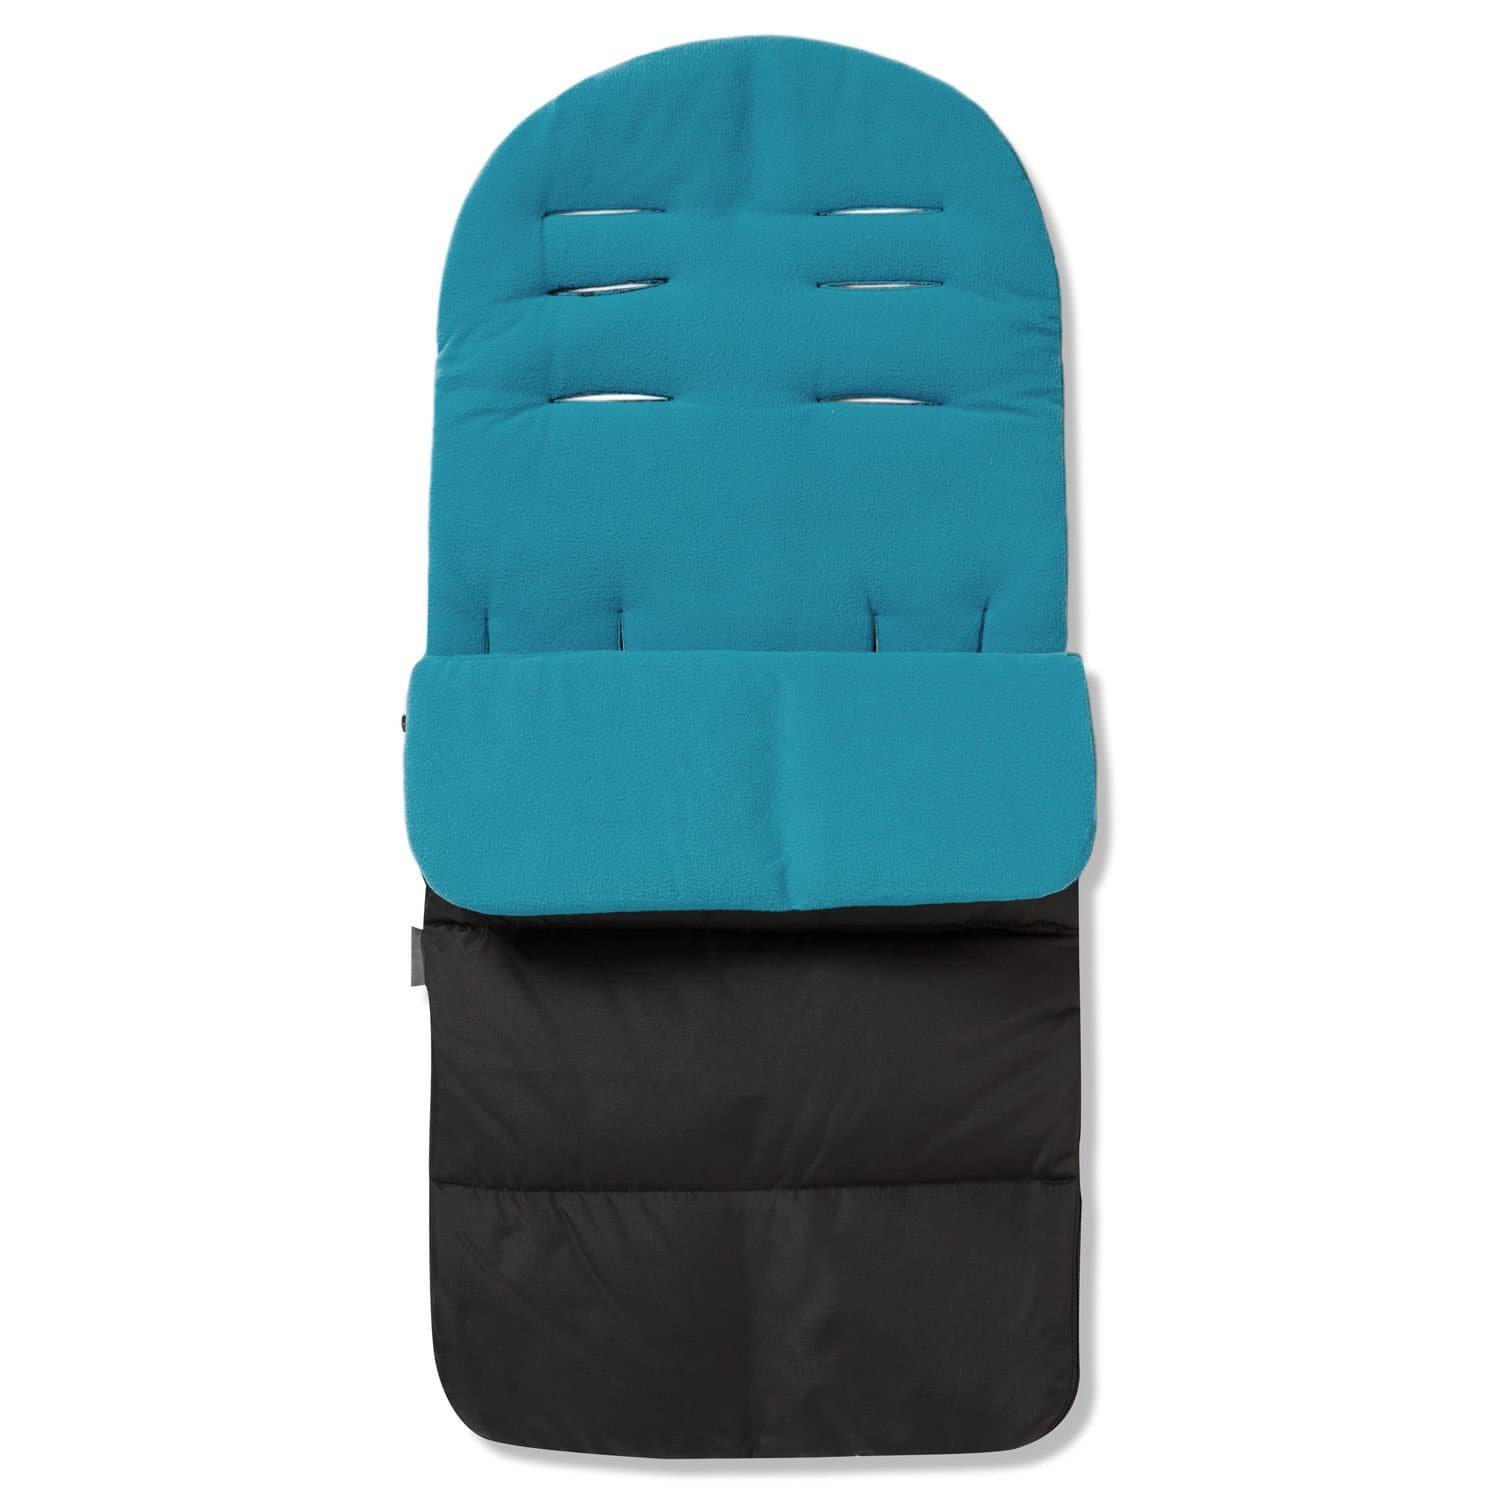 Premium Footmuff / Cosy Toes Compatible with Silver Cross - Ocean Blue / Fits All Models | For Your Little One